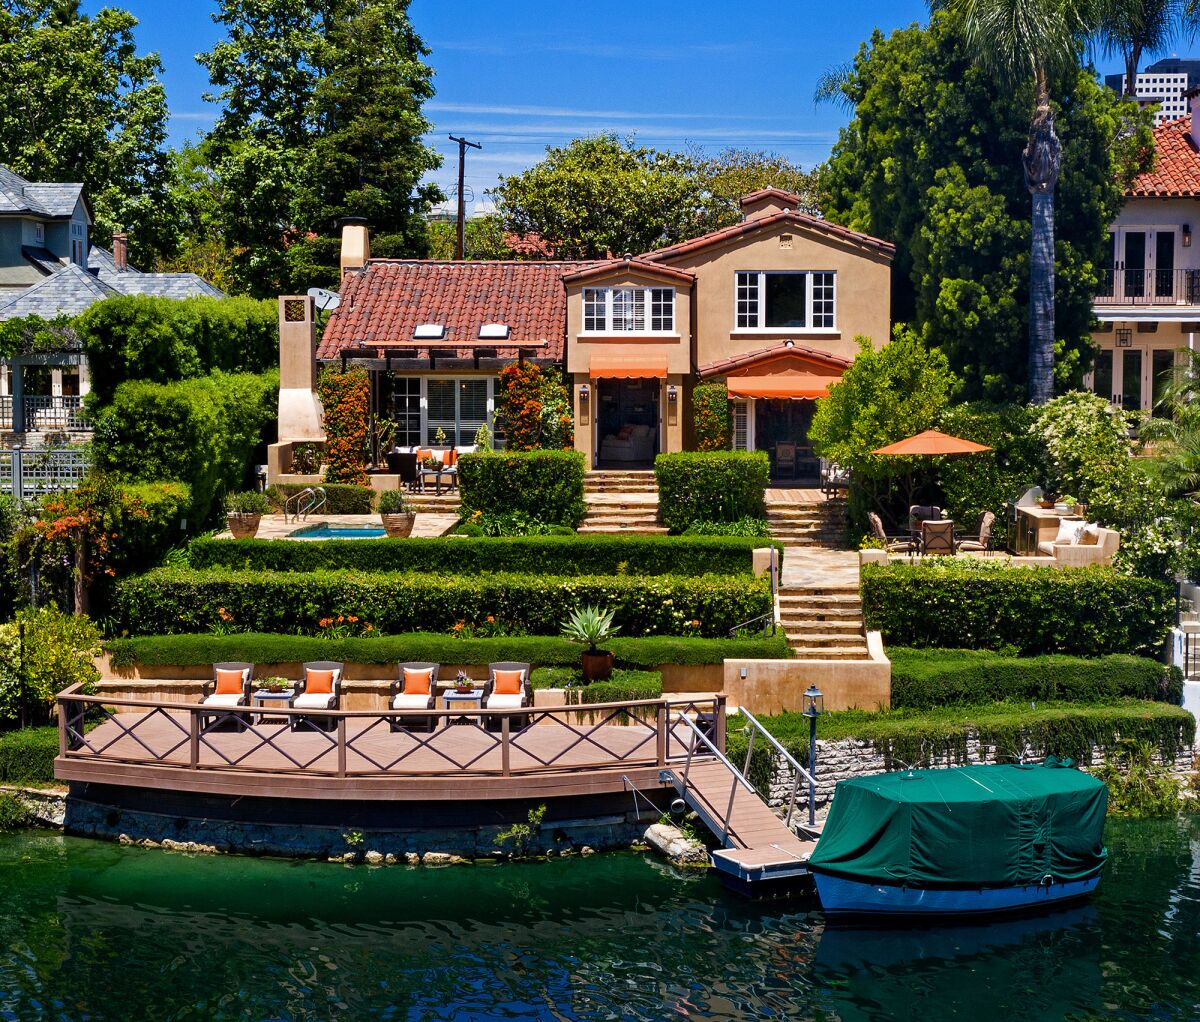 The Spanish-vibe Toluca Lake home counts Roy E. Disney, Boris Karloff and Erich Korngold among its former owners.